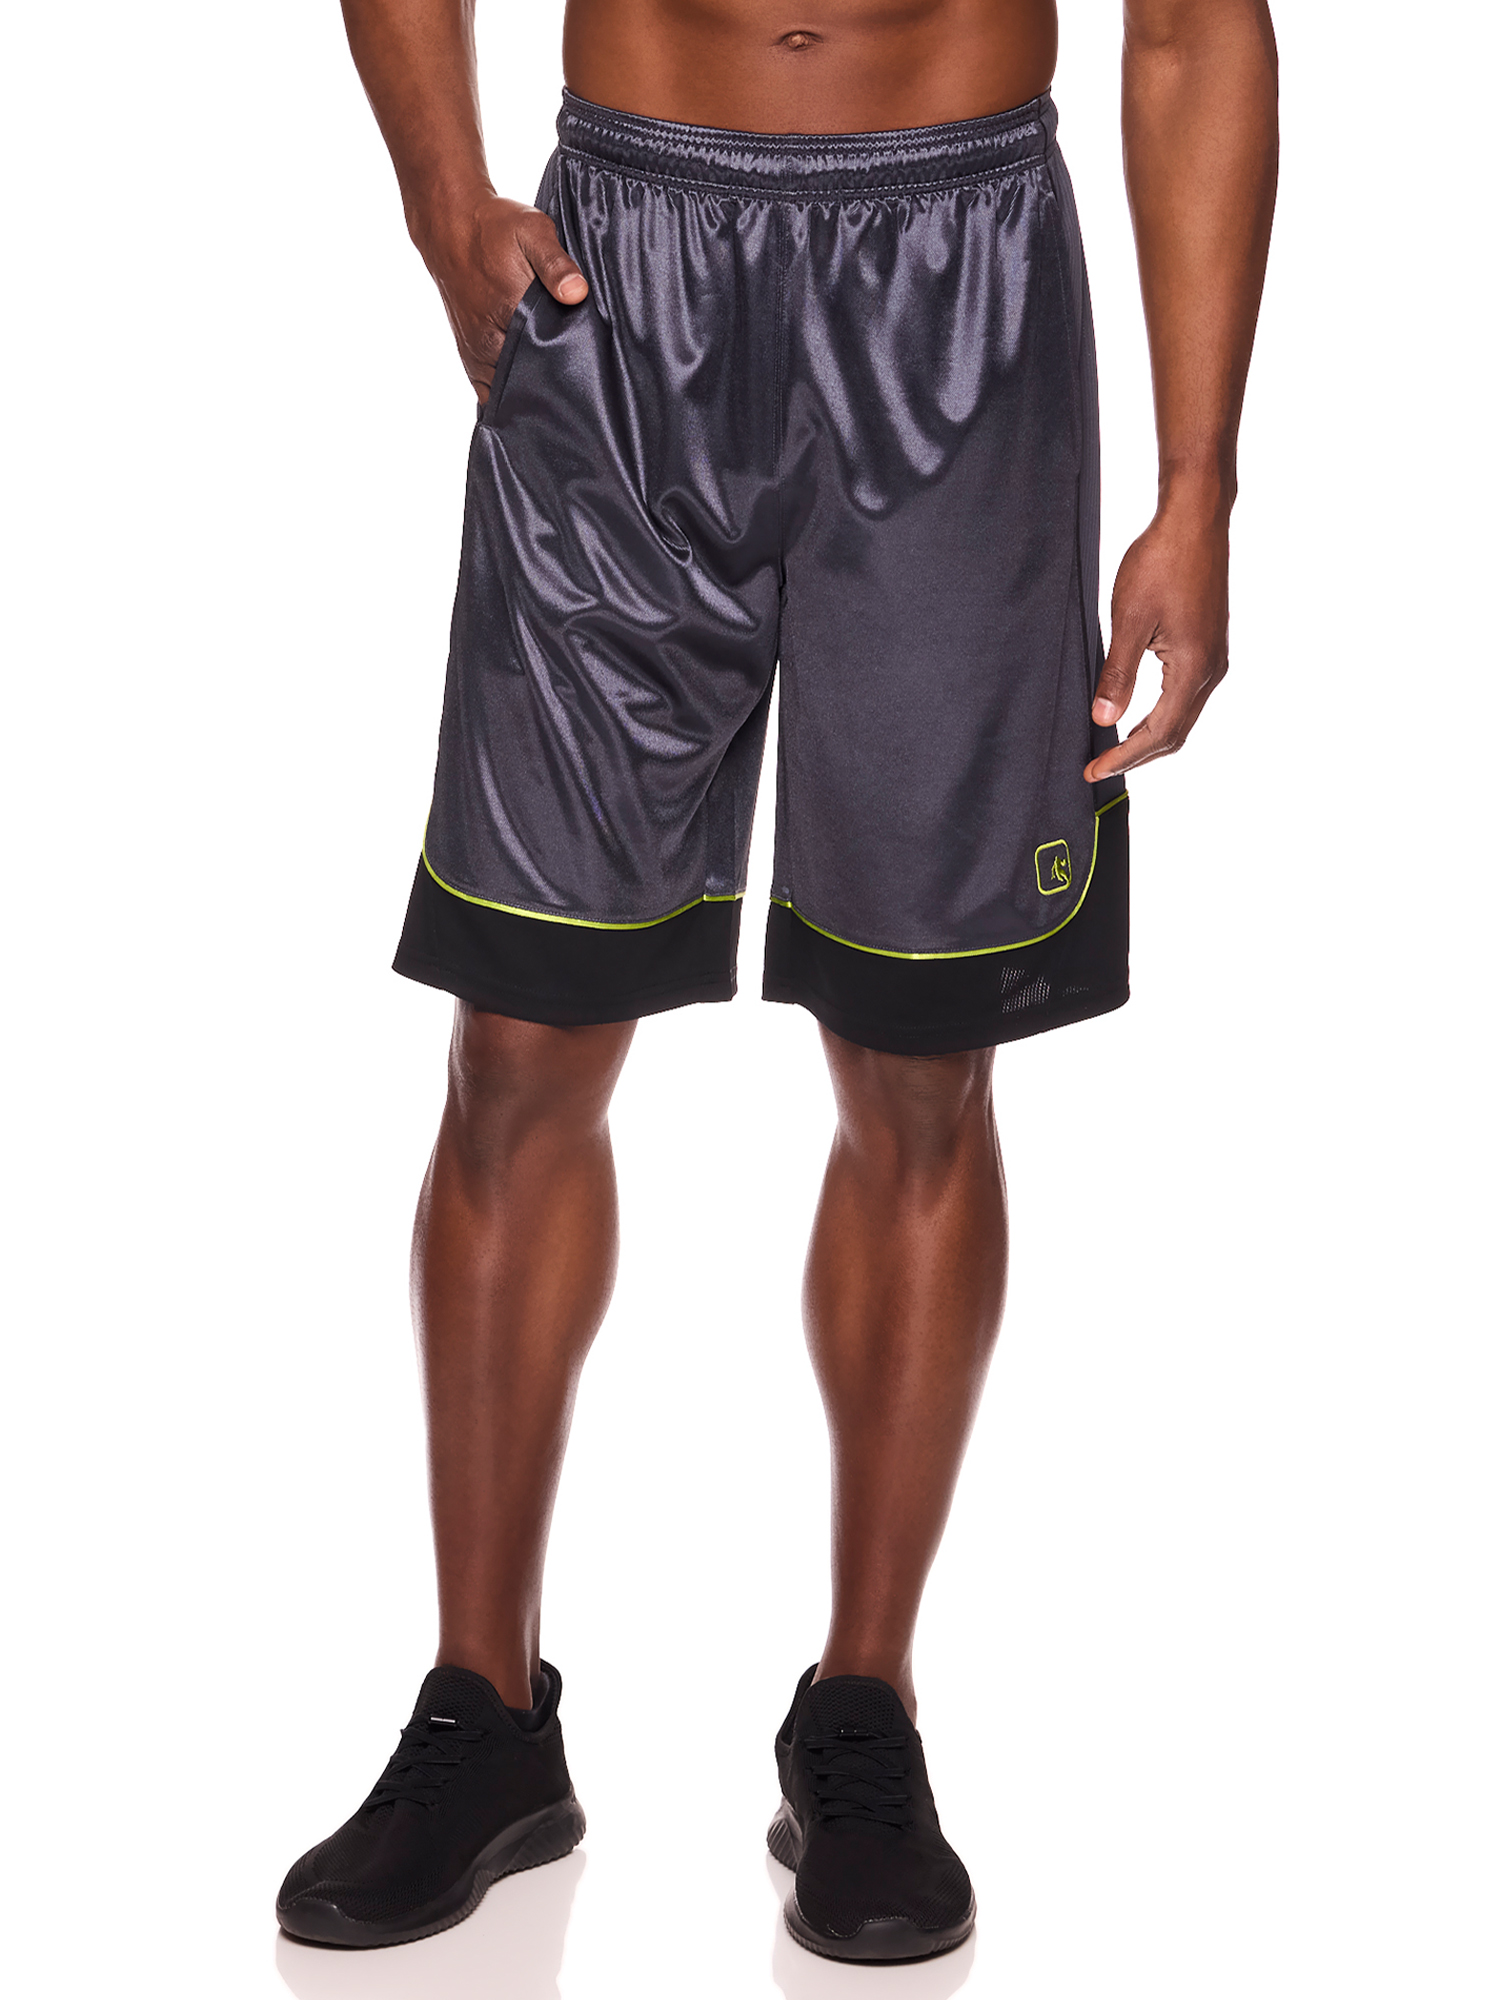 AND1 Men and Big Men's All Court Colorblock 11" Shorts, up to Size 3XL - image 1 of 5